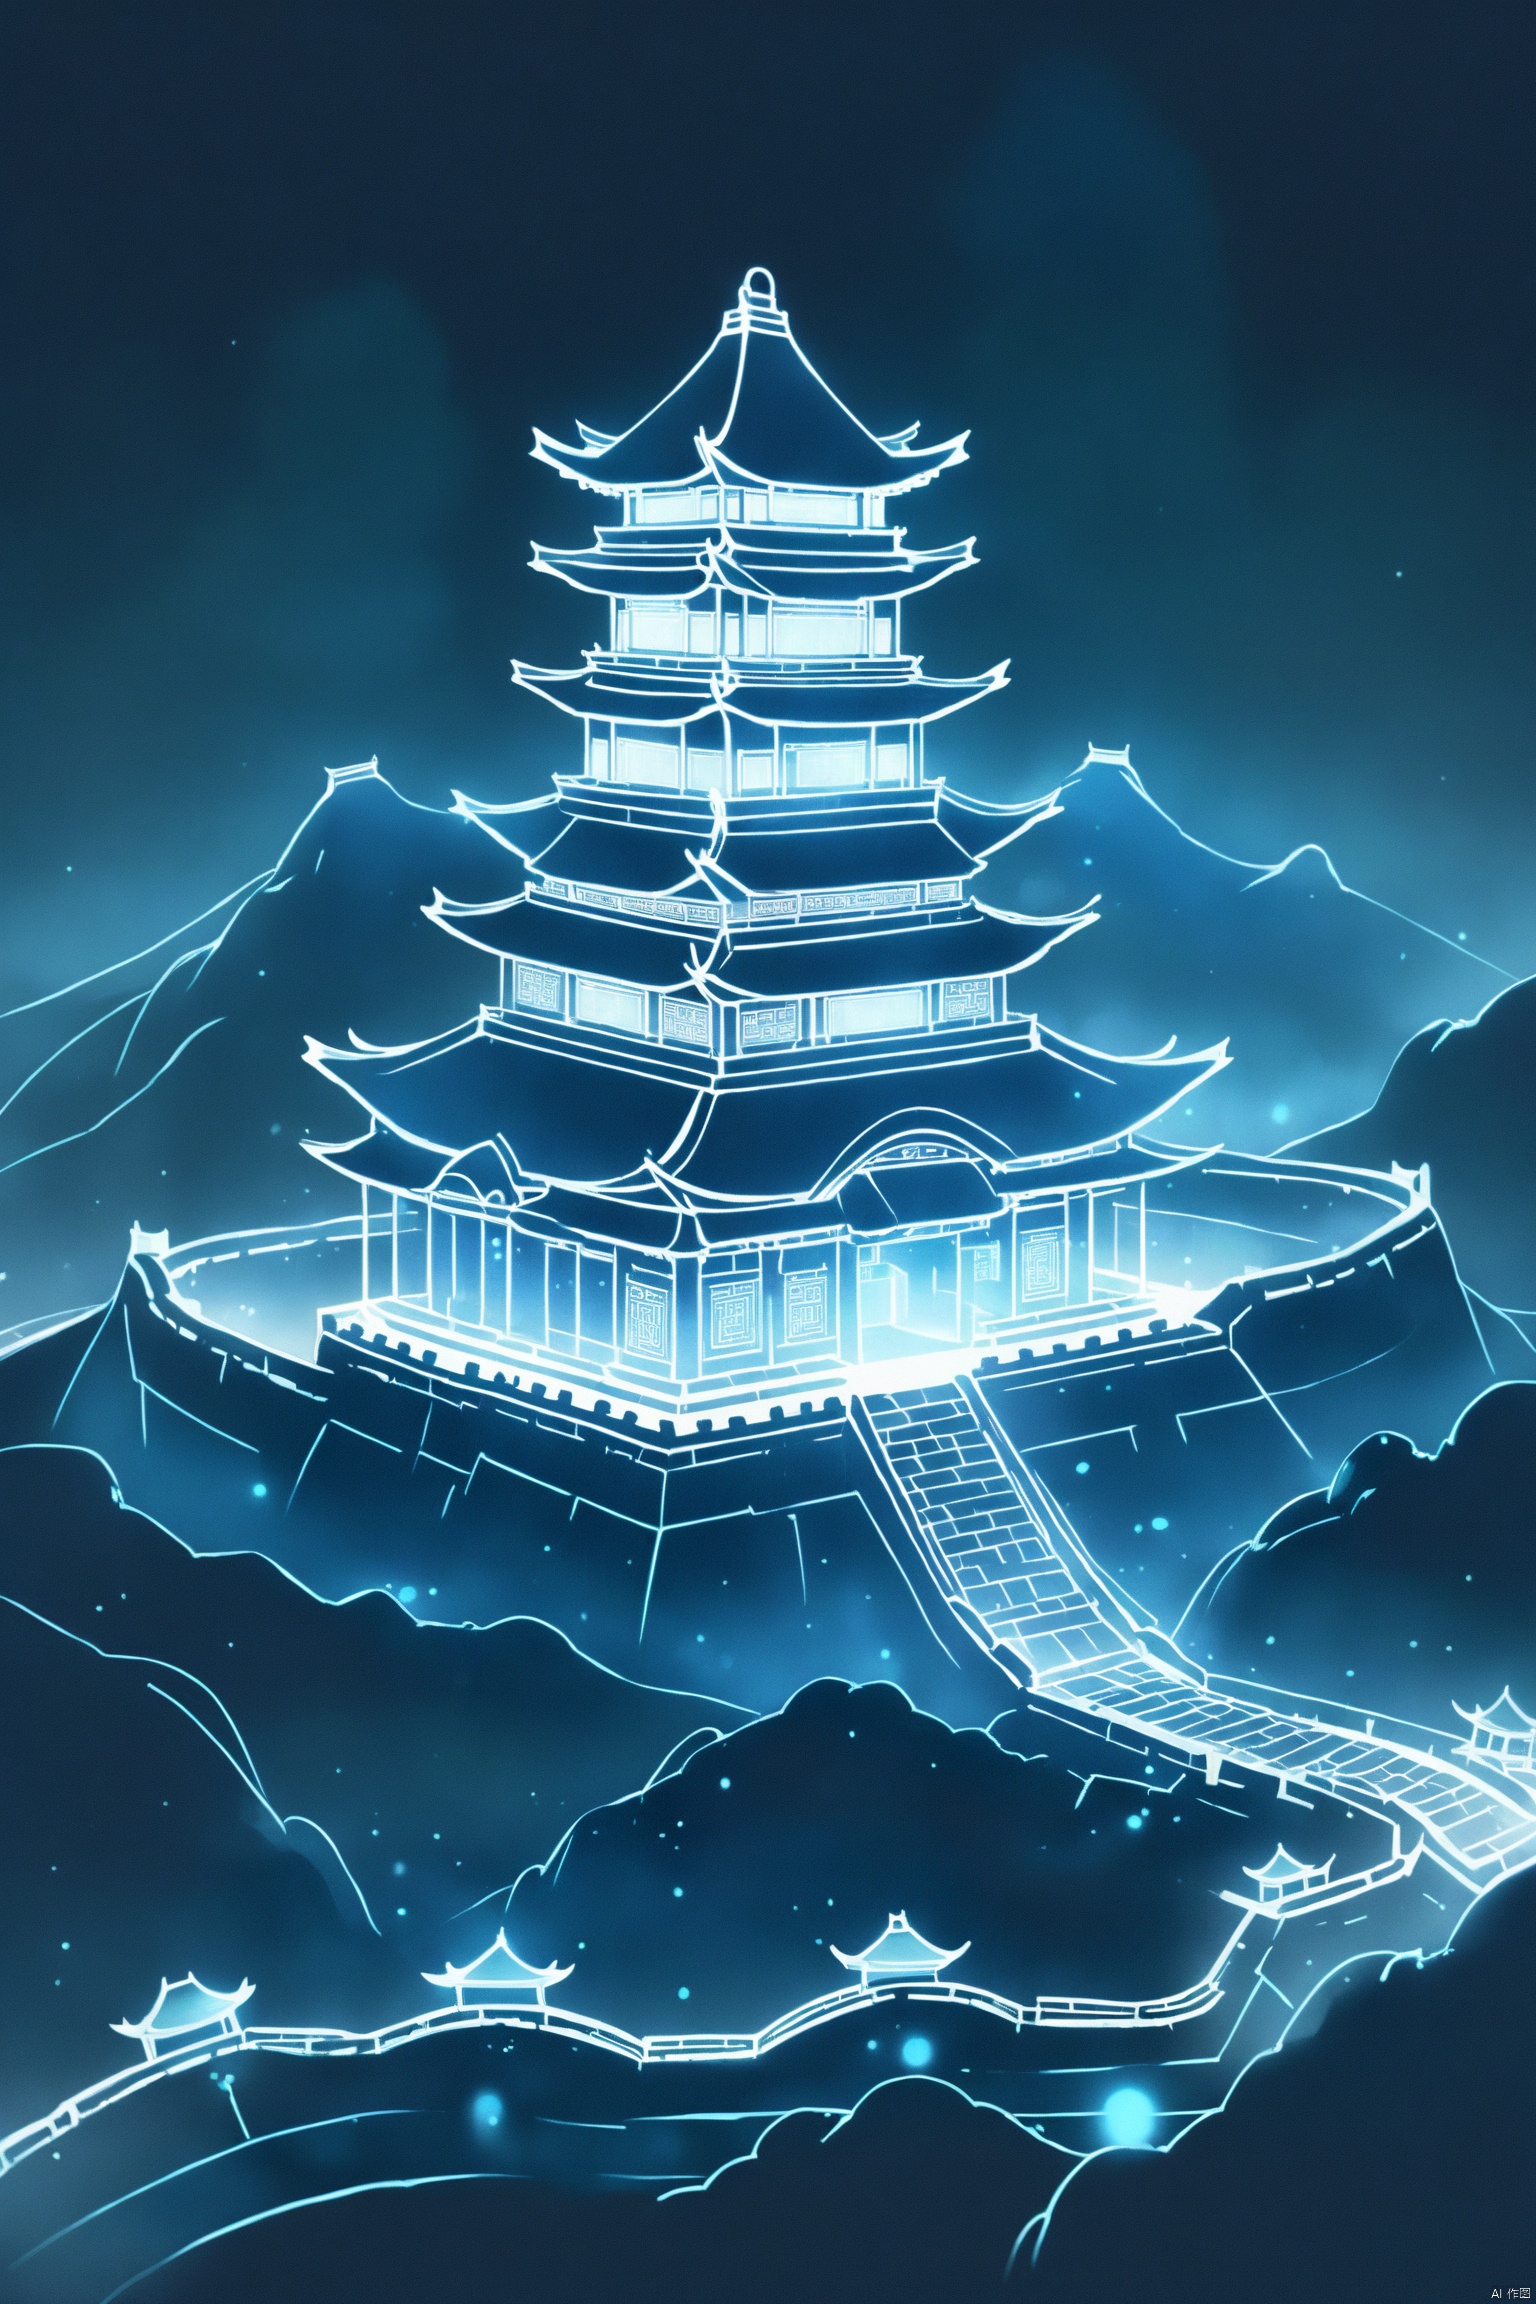 A wireframe hologram of the Great Wall （aerial view）with glowing blue lines forming intricate patterns around its iconic structure against an isolated dark background. The design showcases detailed architectural details and features, creating a visually stunning representation of ancient Chinese architecture. This digital artwork is perfect for creative projects that need to convey both historical significance and futuristic technology, in the style of 8k